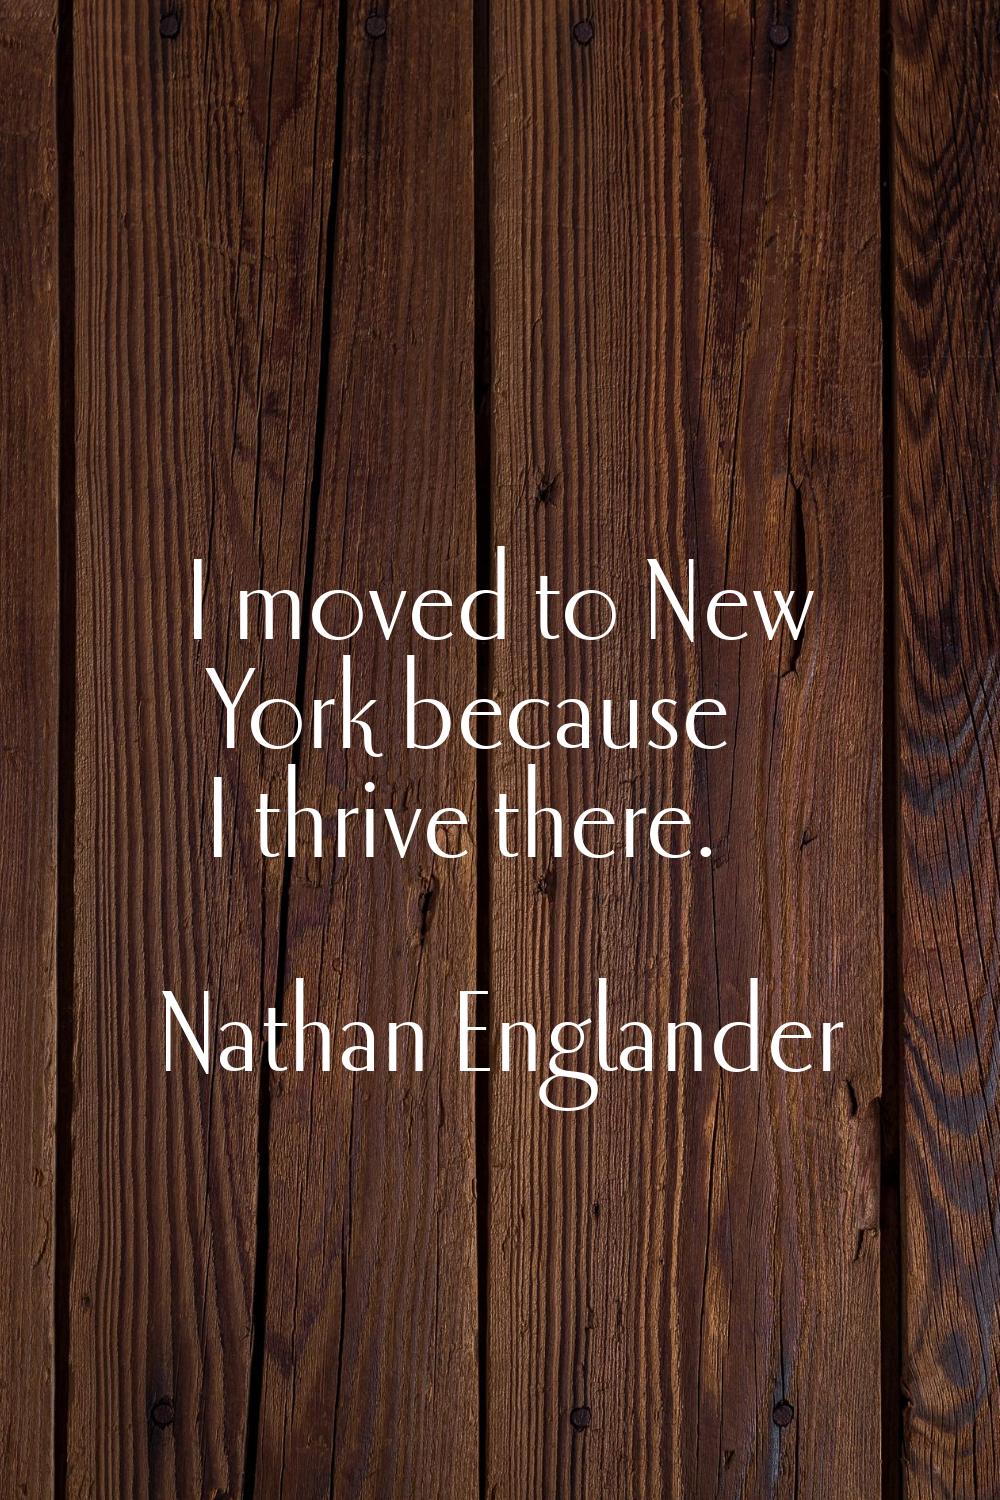 I moved to New York because I thrive there.